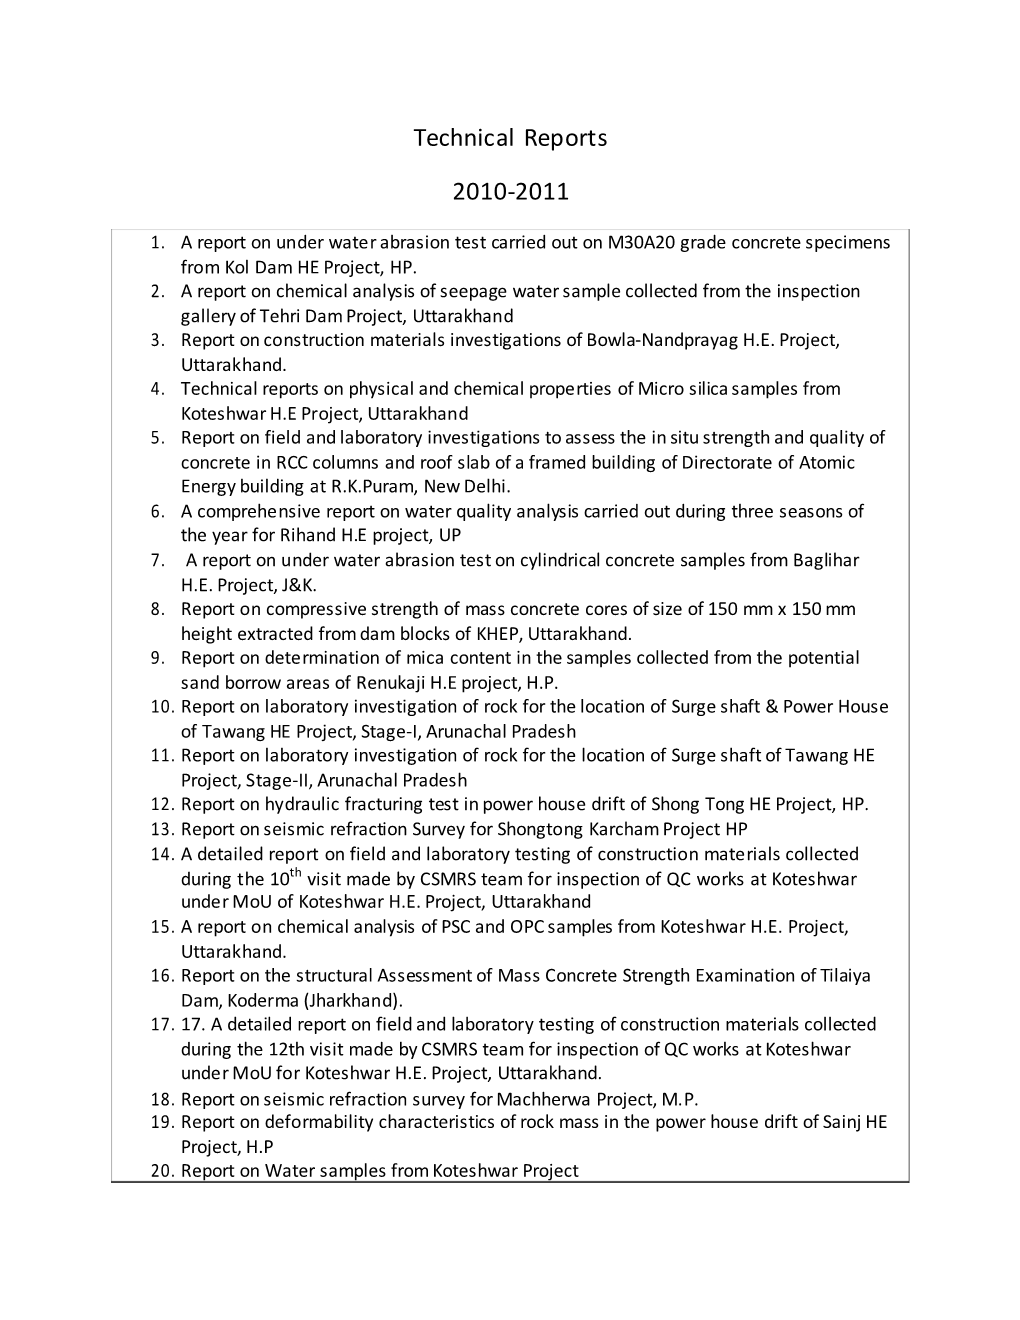 Technical Reports 2010-2011